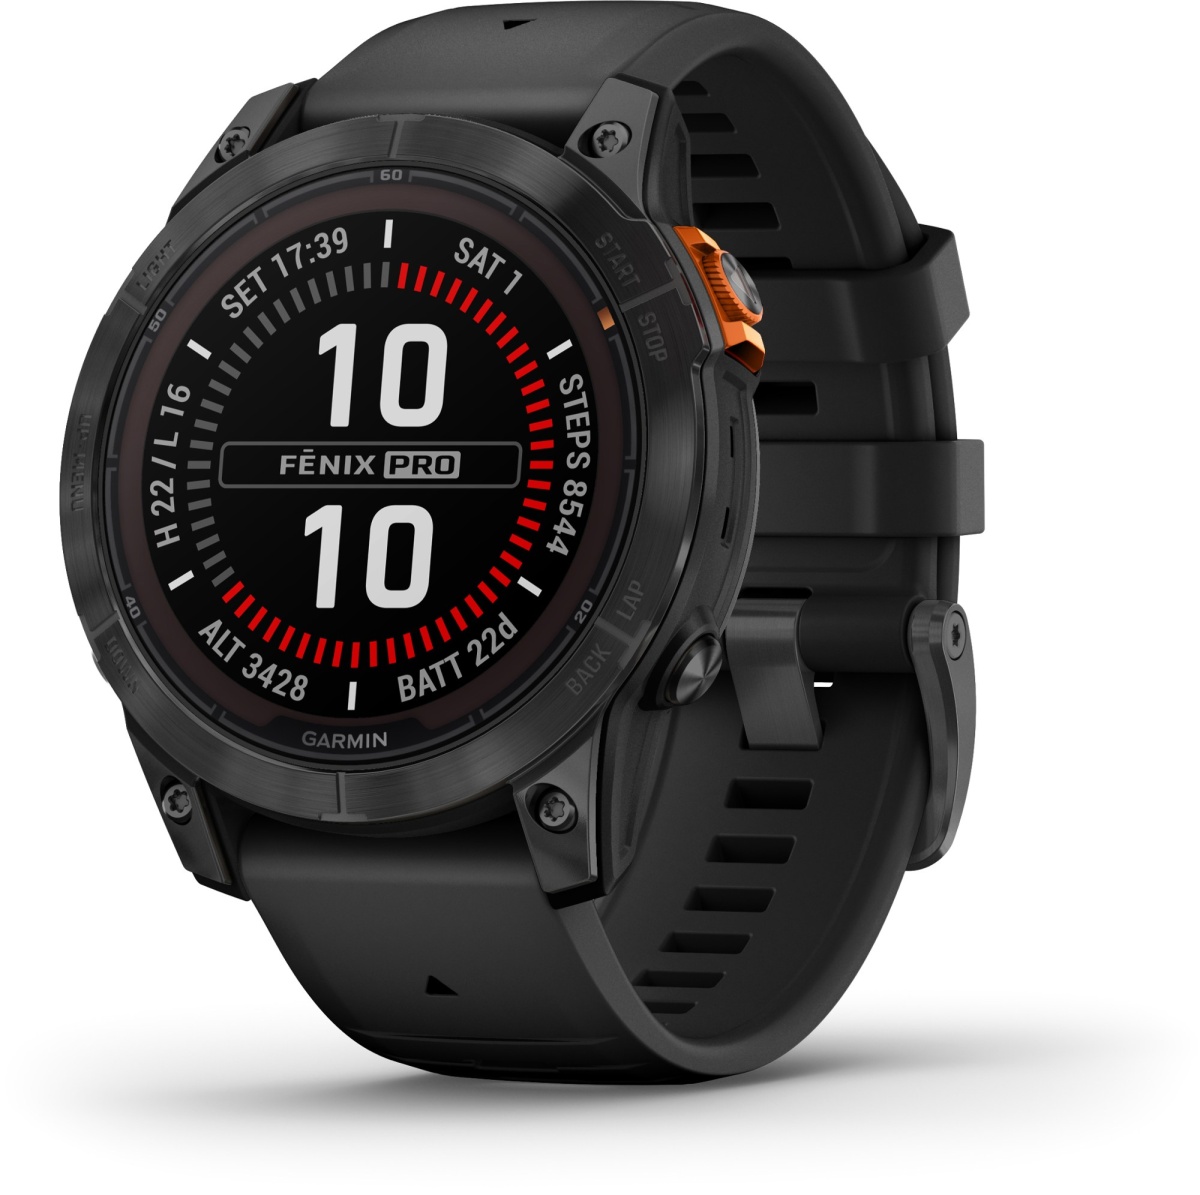 Top 10 Best GPS Smartwatches For Sports 2021 